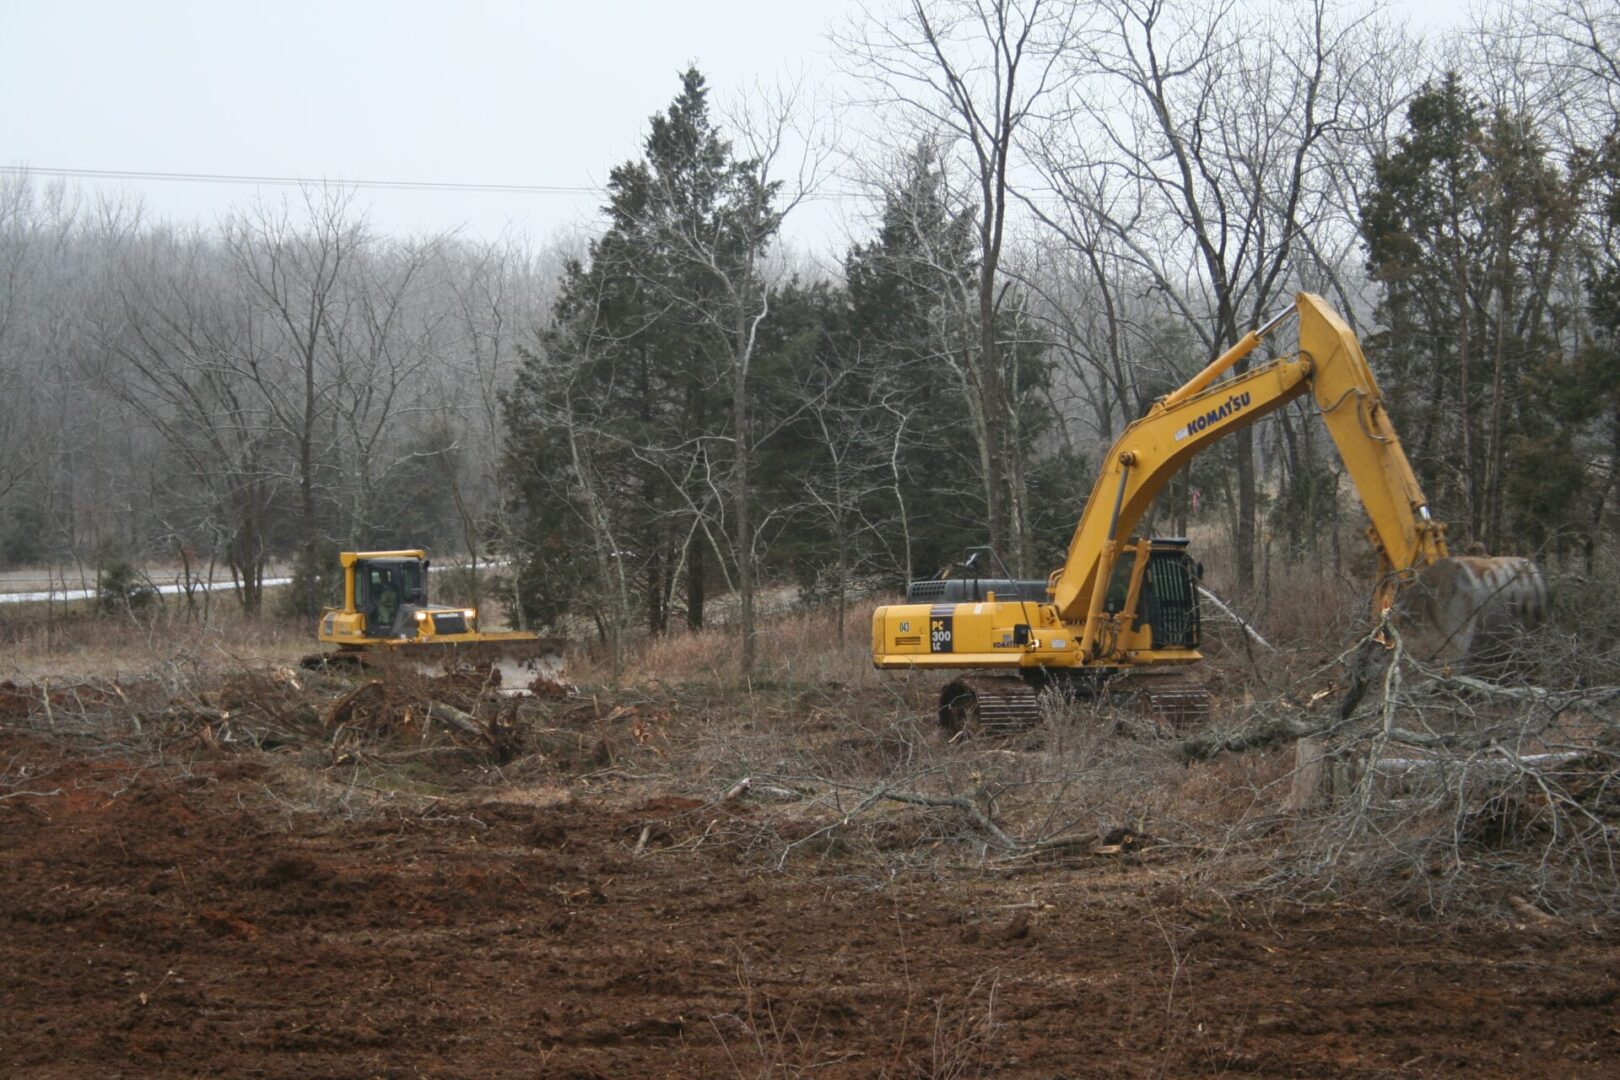 Land clearing operation with an excavator and a bulldozer in a forested area.